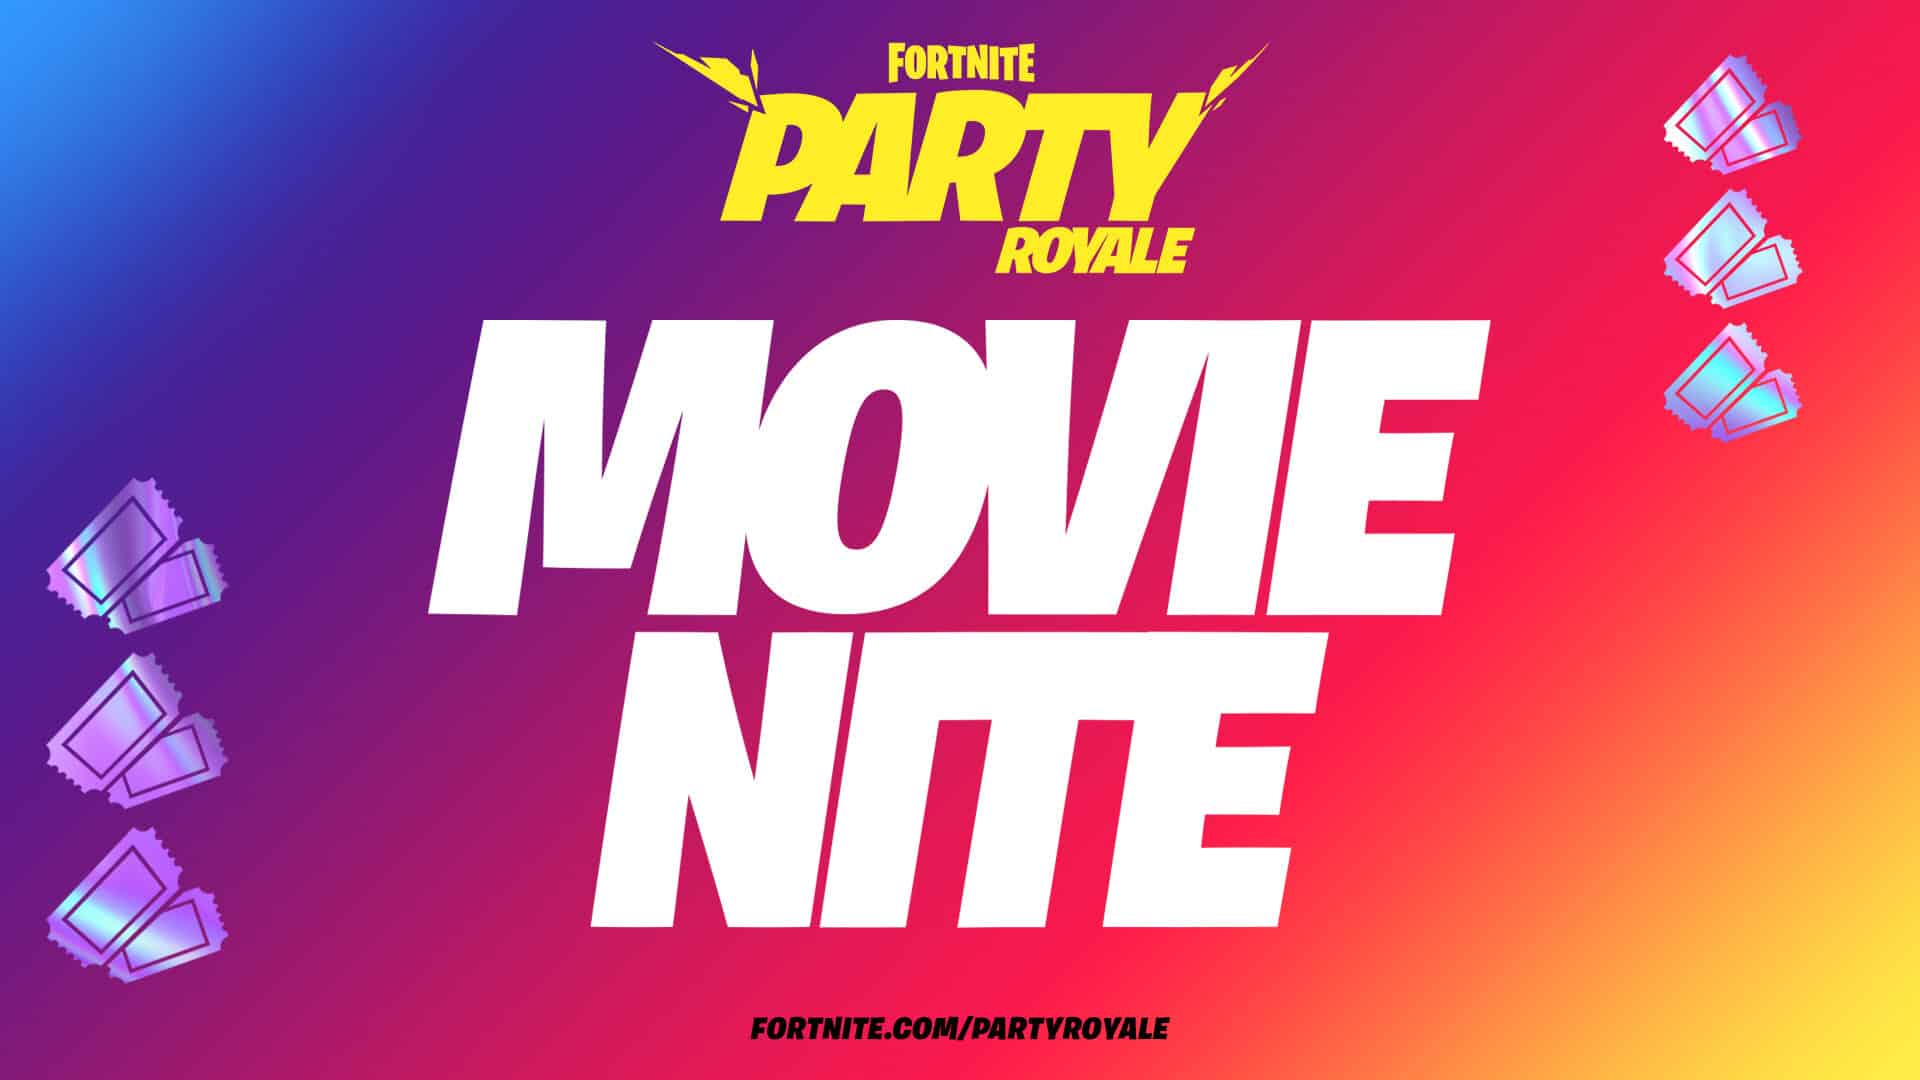 Fortnite party royale 